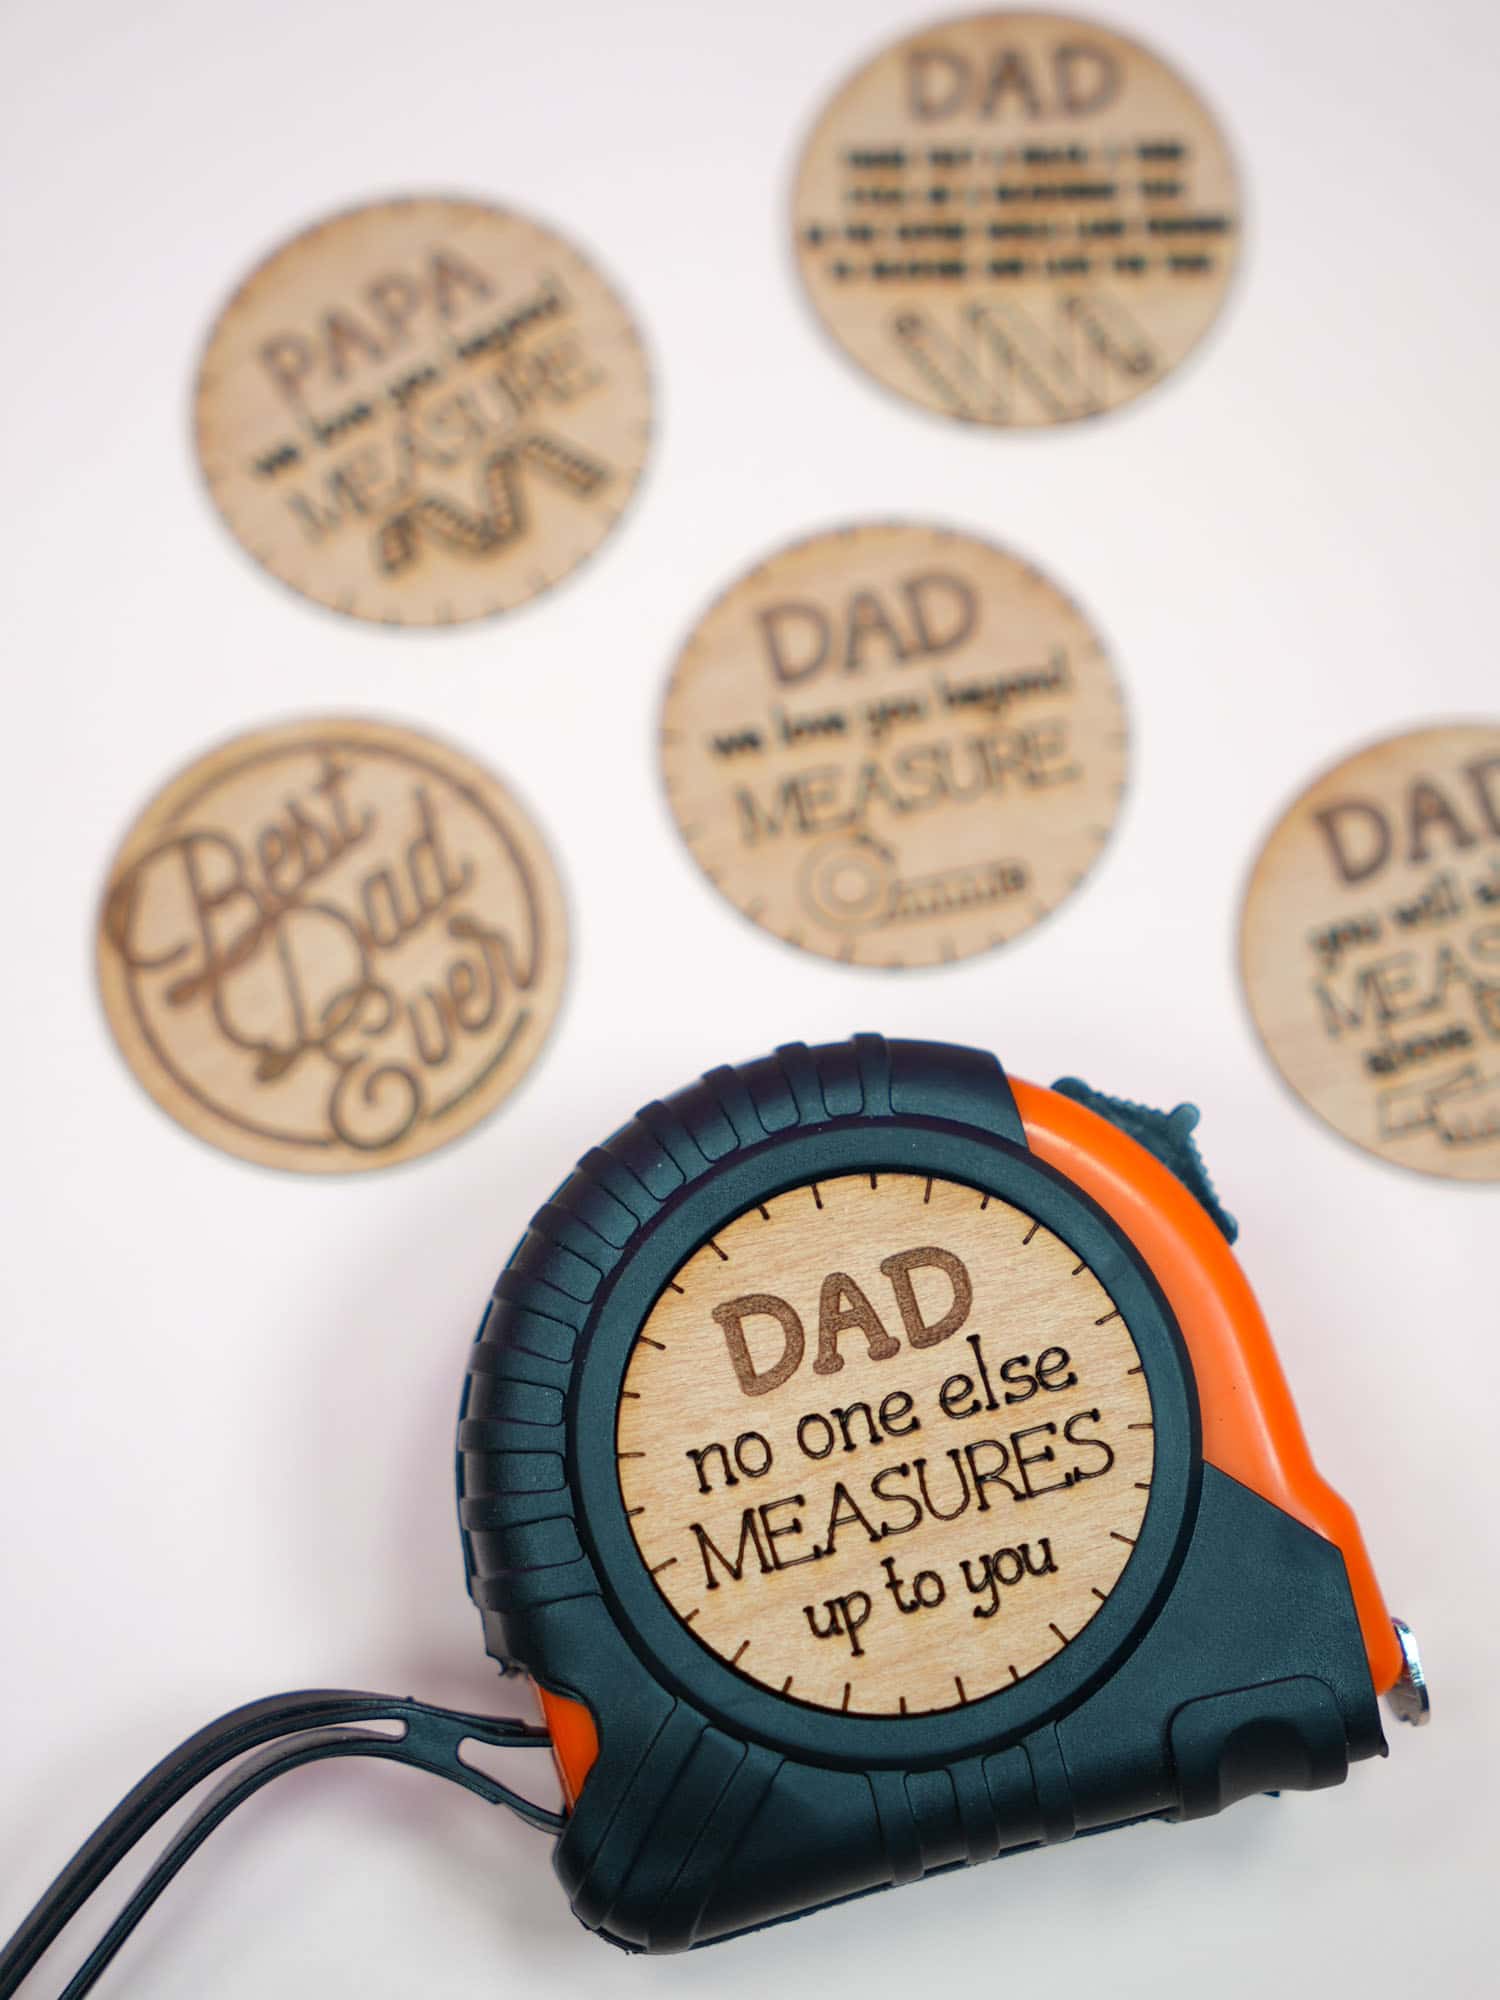 "Dad No One Else Measures Up to You" wood sticker on black and orange tape measure